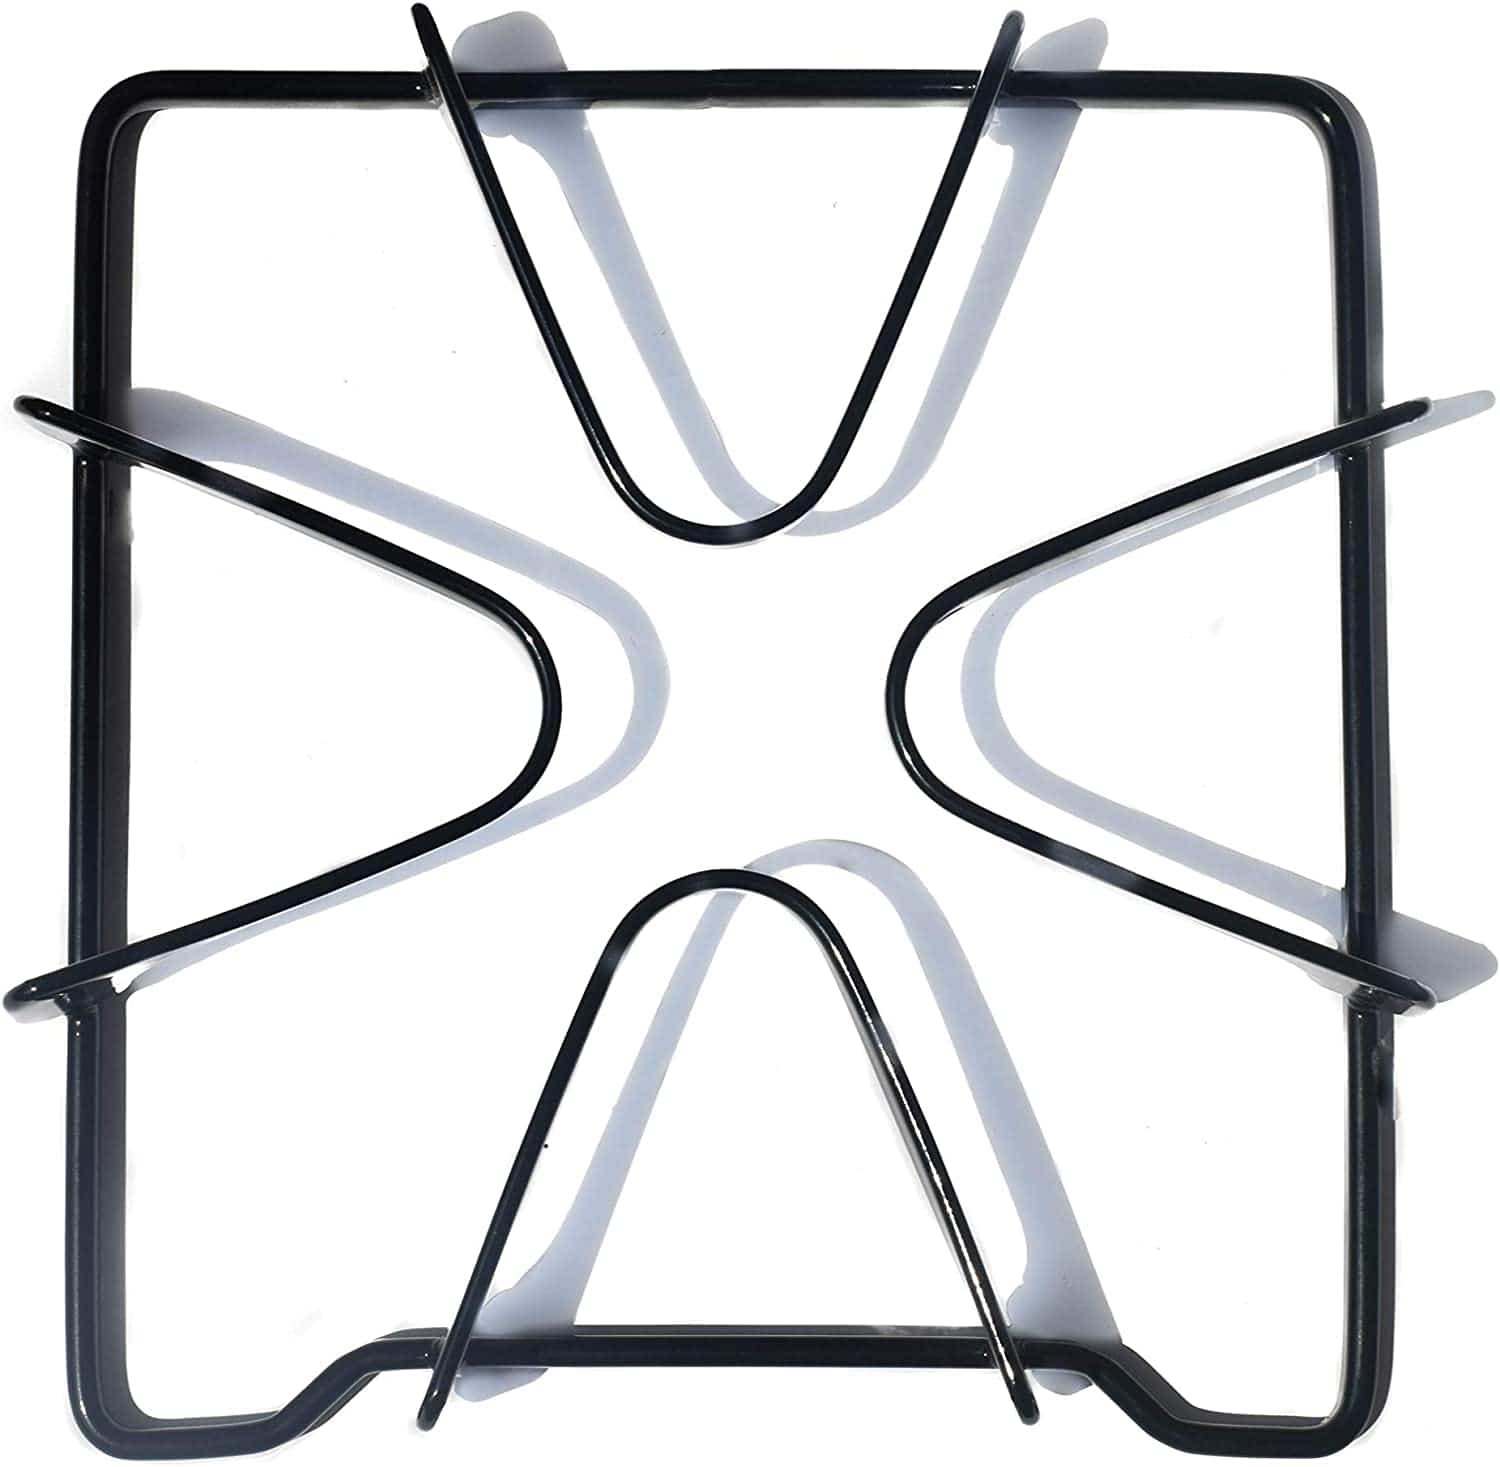 Insulated Countertop Protector Mats / Metal Trivets - Silver